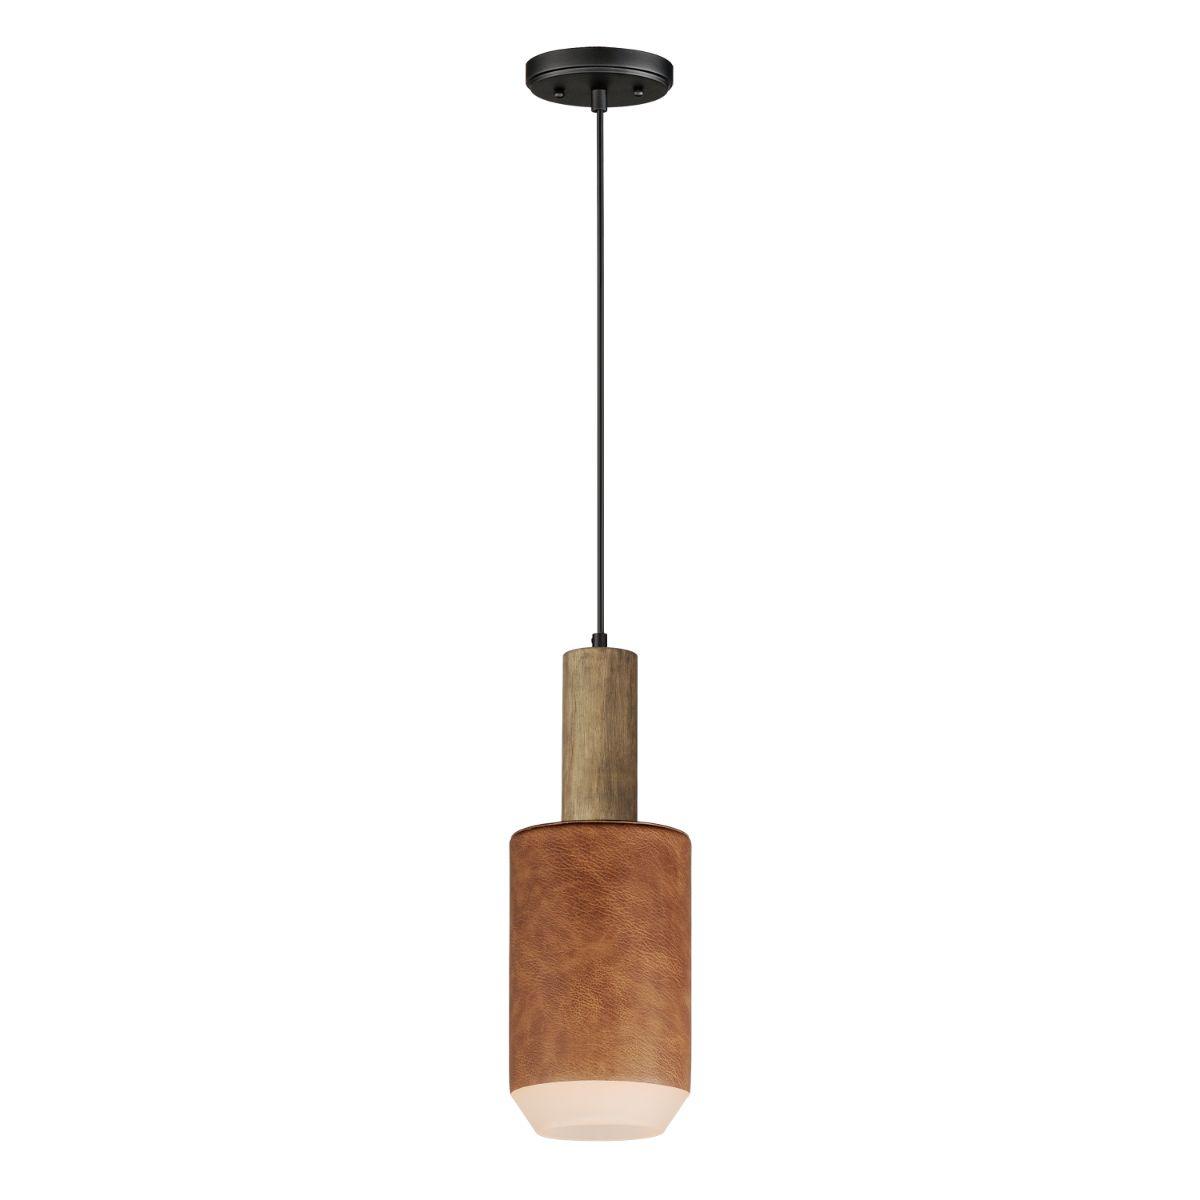 SCOUT 7 in. LED Pendant Light Weathered Wood & Tan Leather